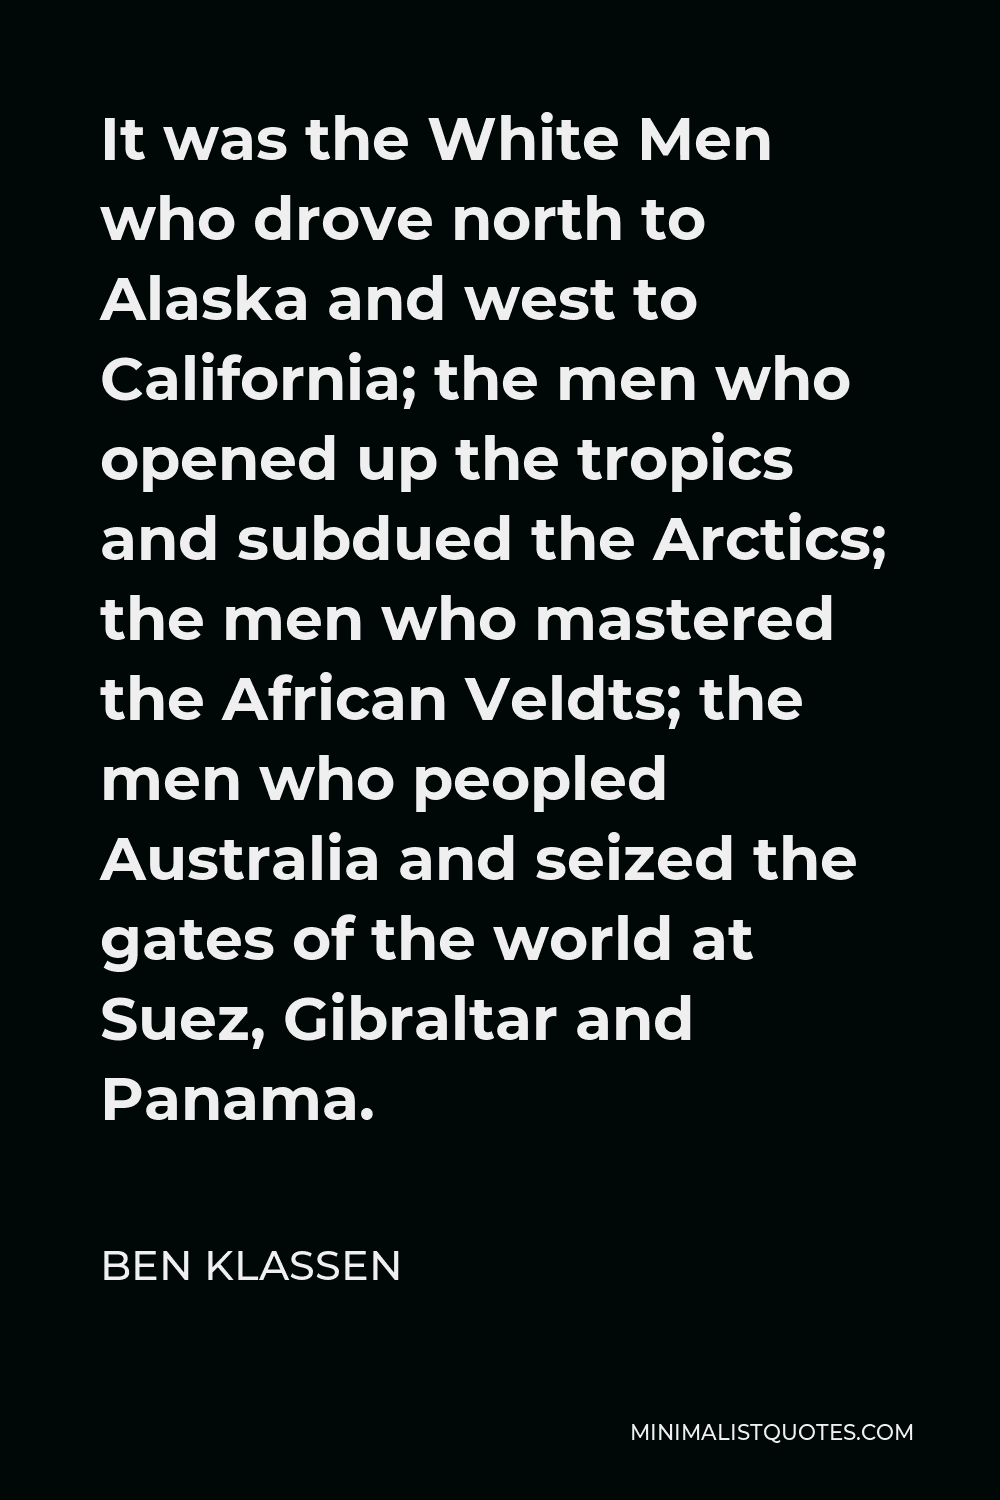 Ben Klassen Quote - It was the White Men who drove north to Alaska and west to California; the men who opened up the tropics and subdued the Arctics; the men who mastered the African Veldts; the men who peopled Australia and seized the gates of the world at Suez, Gibraltar and Panama.